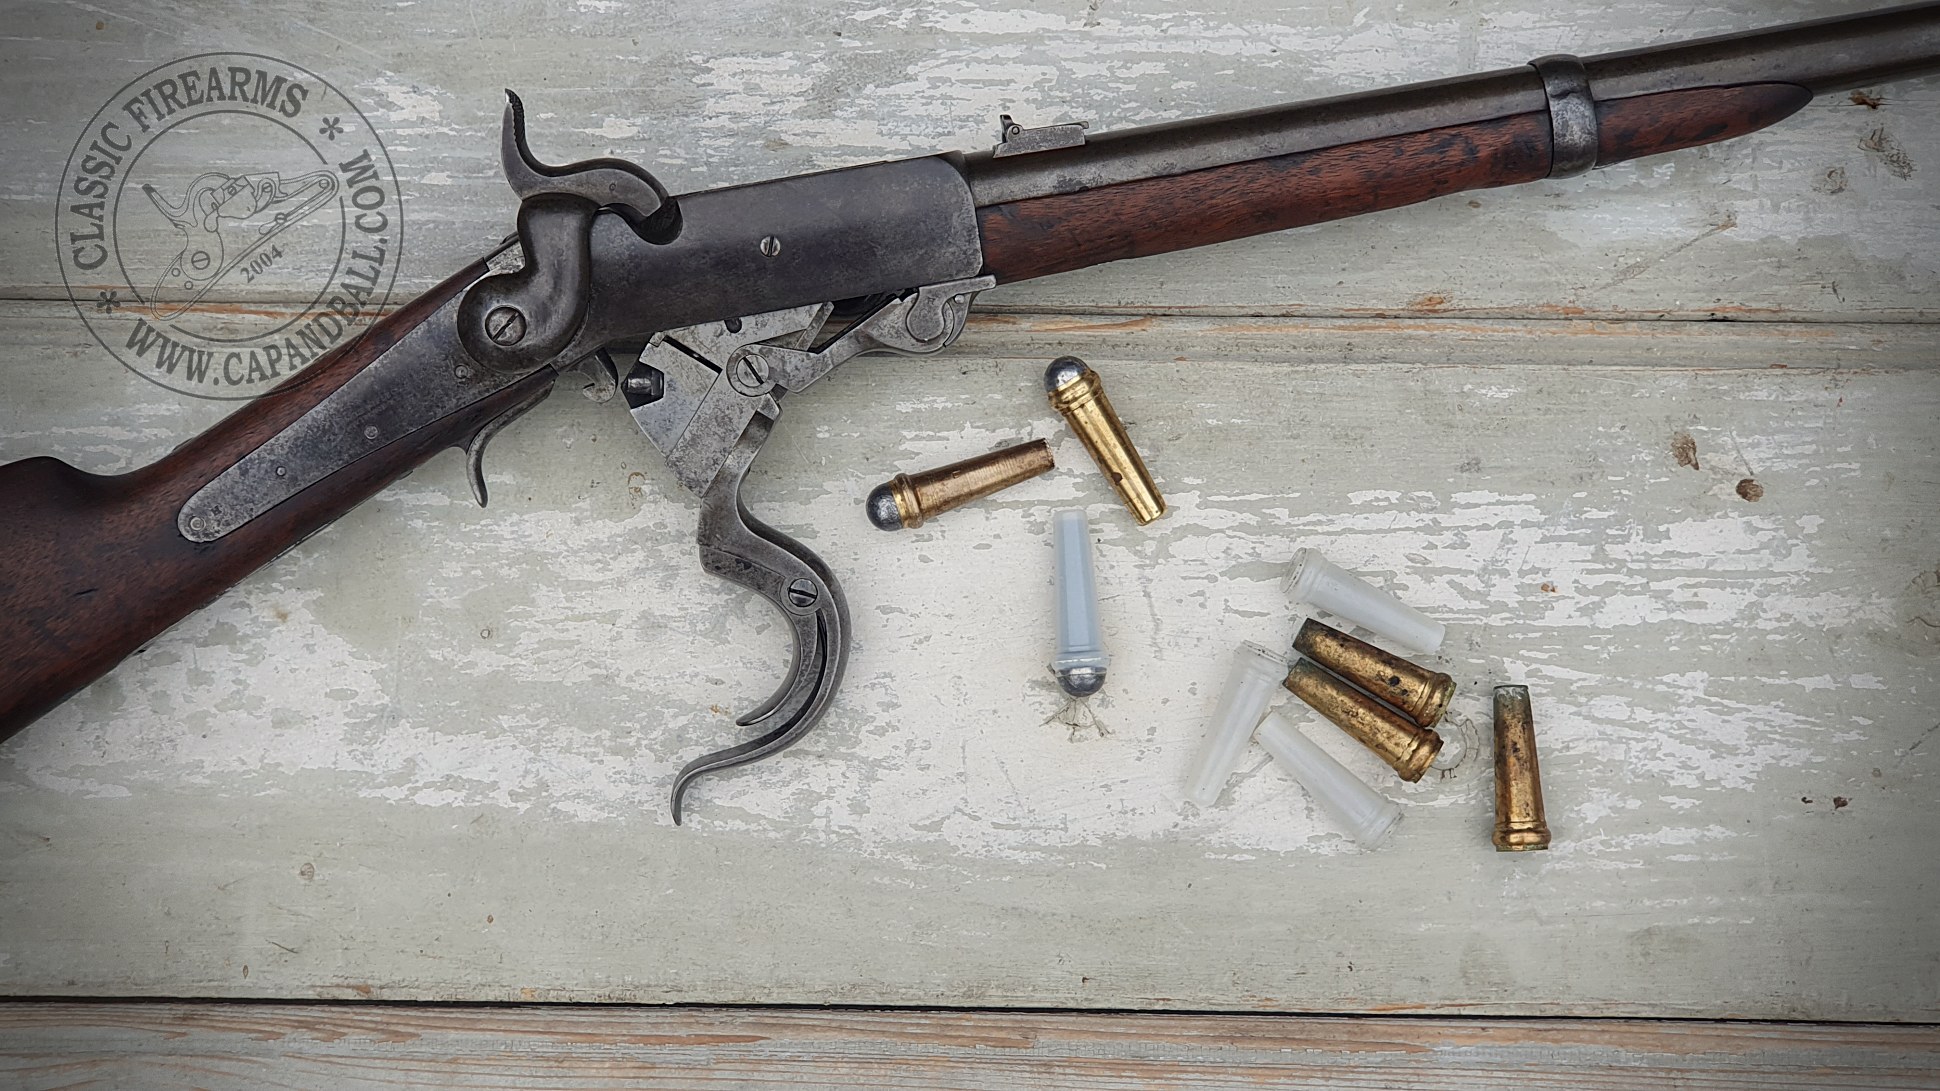 Historical Muzzle Loader Accessories: what are they and can I make